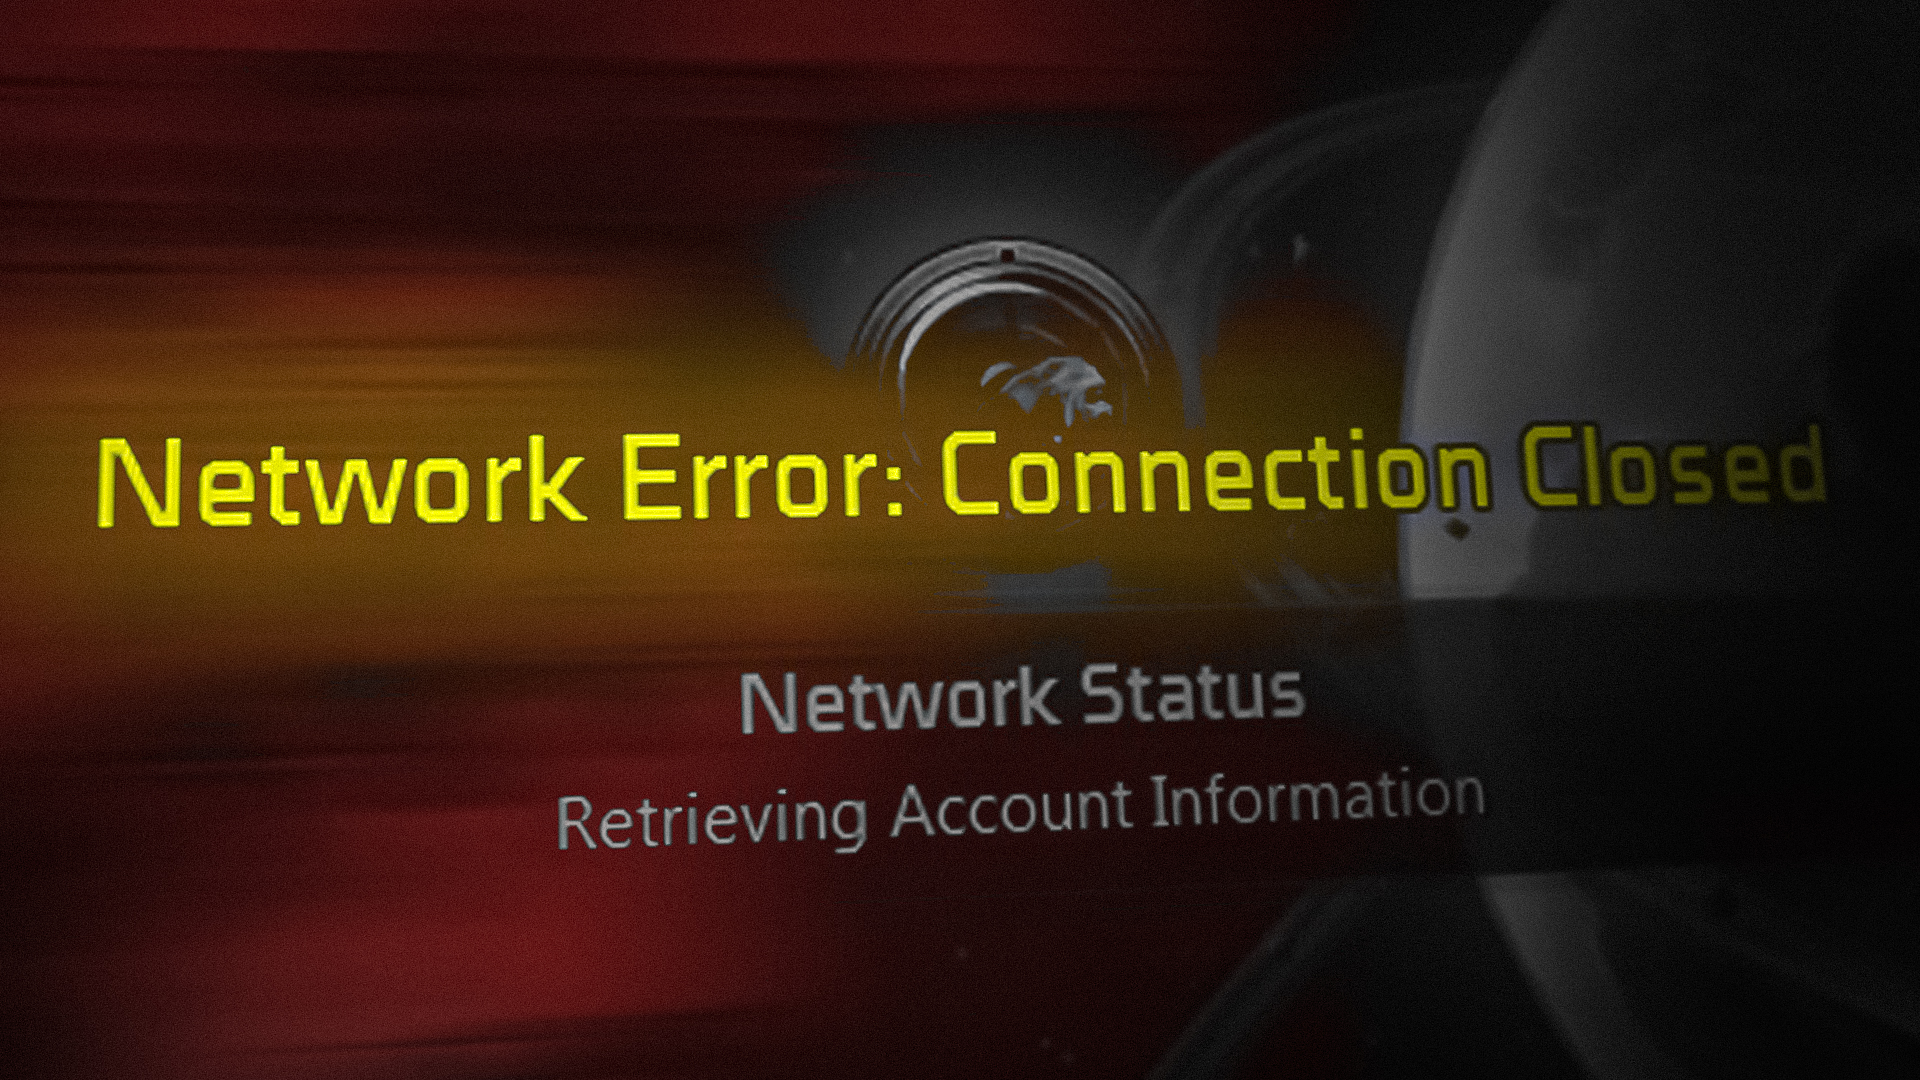 The Wildstar Network Error Connection Closed